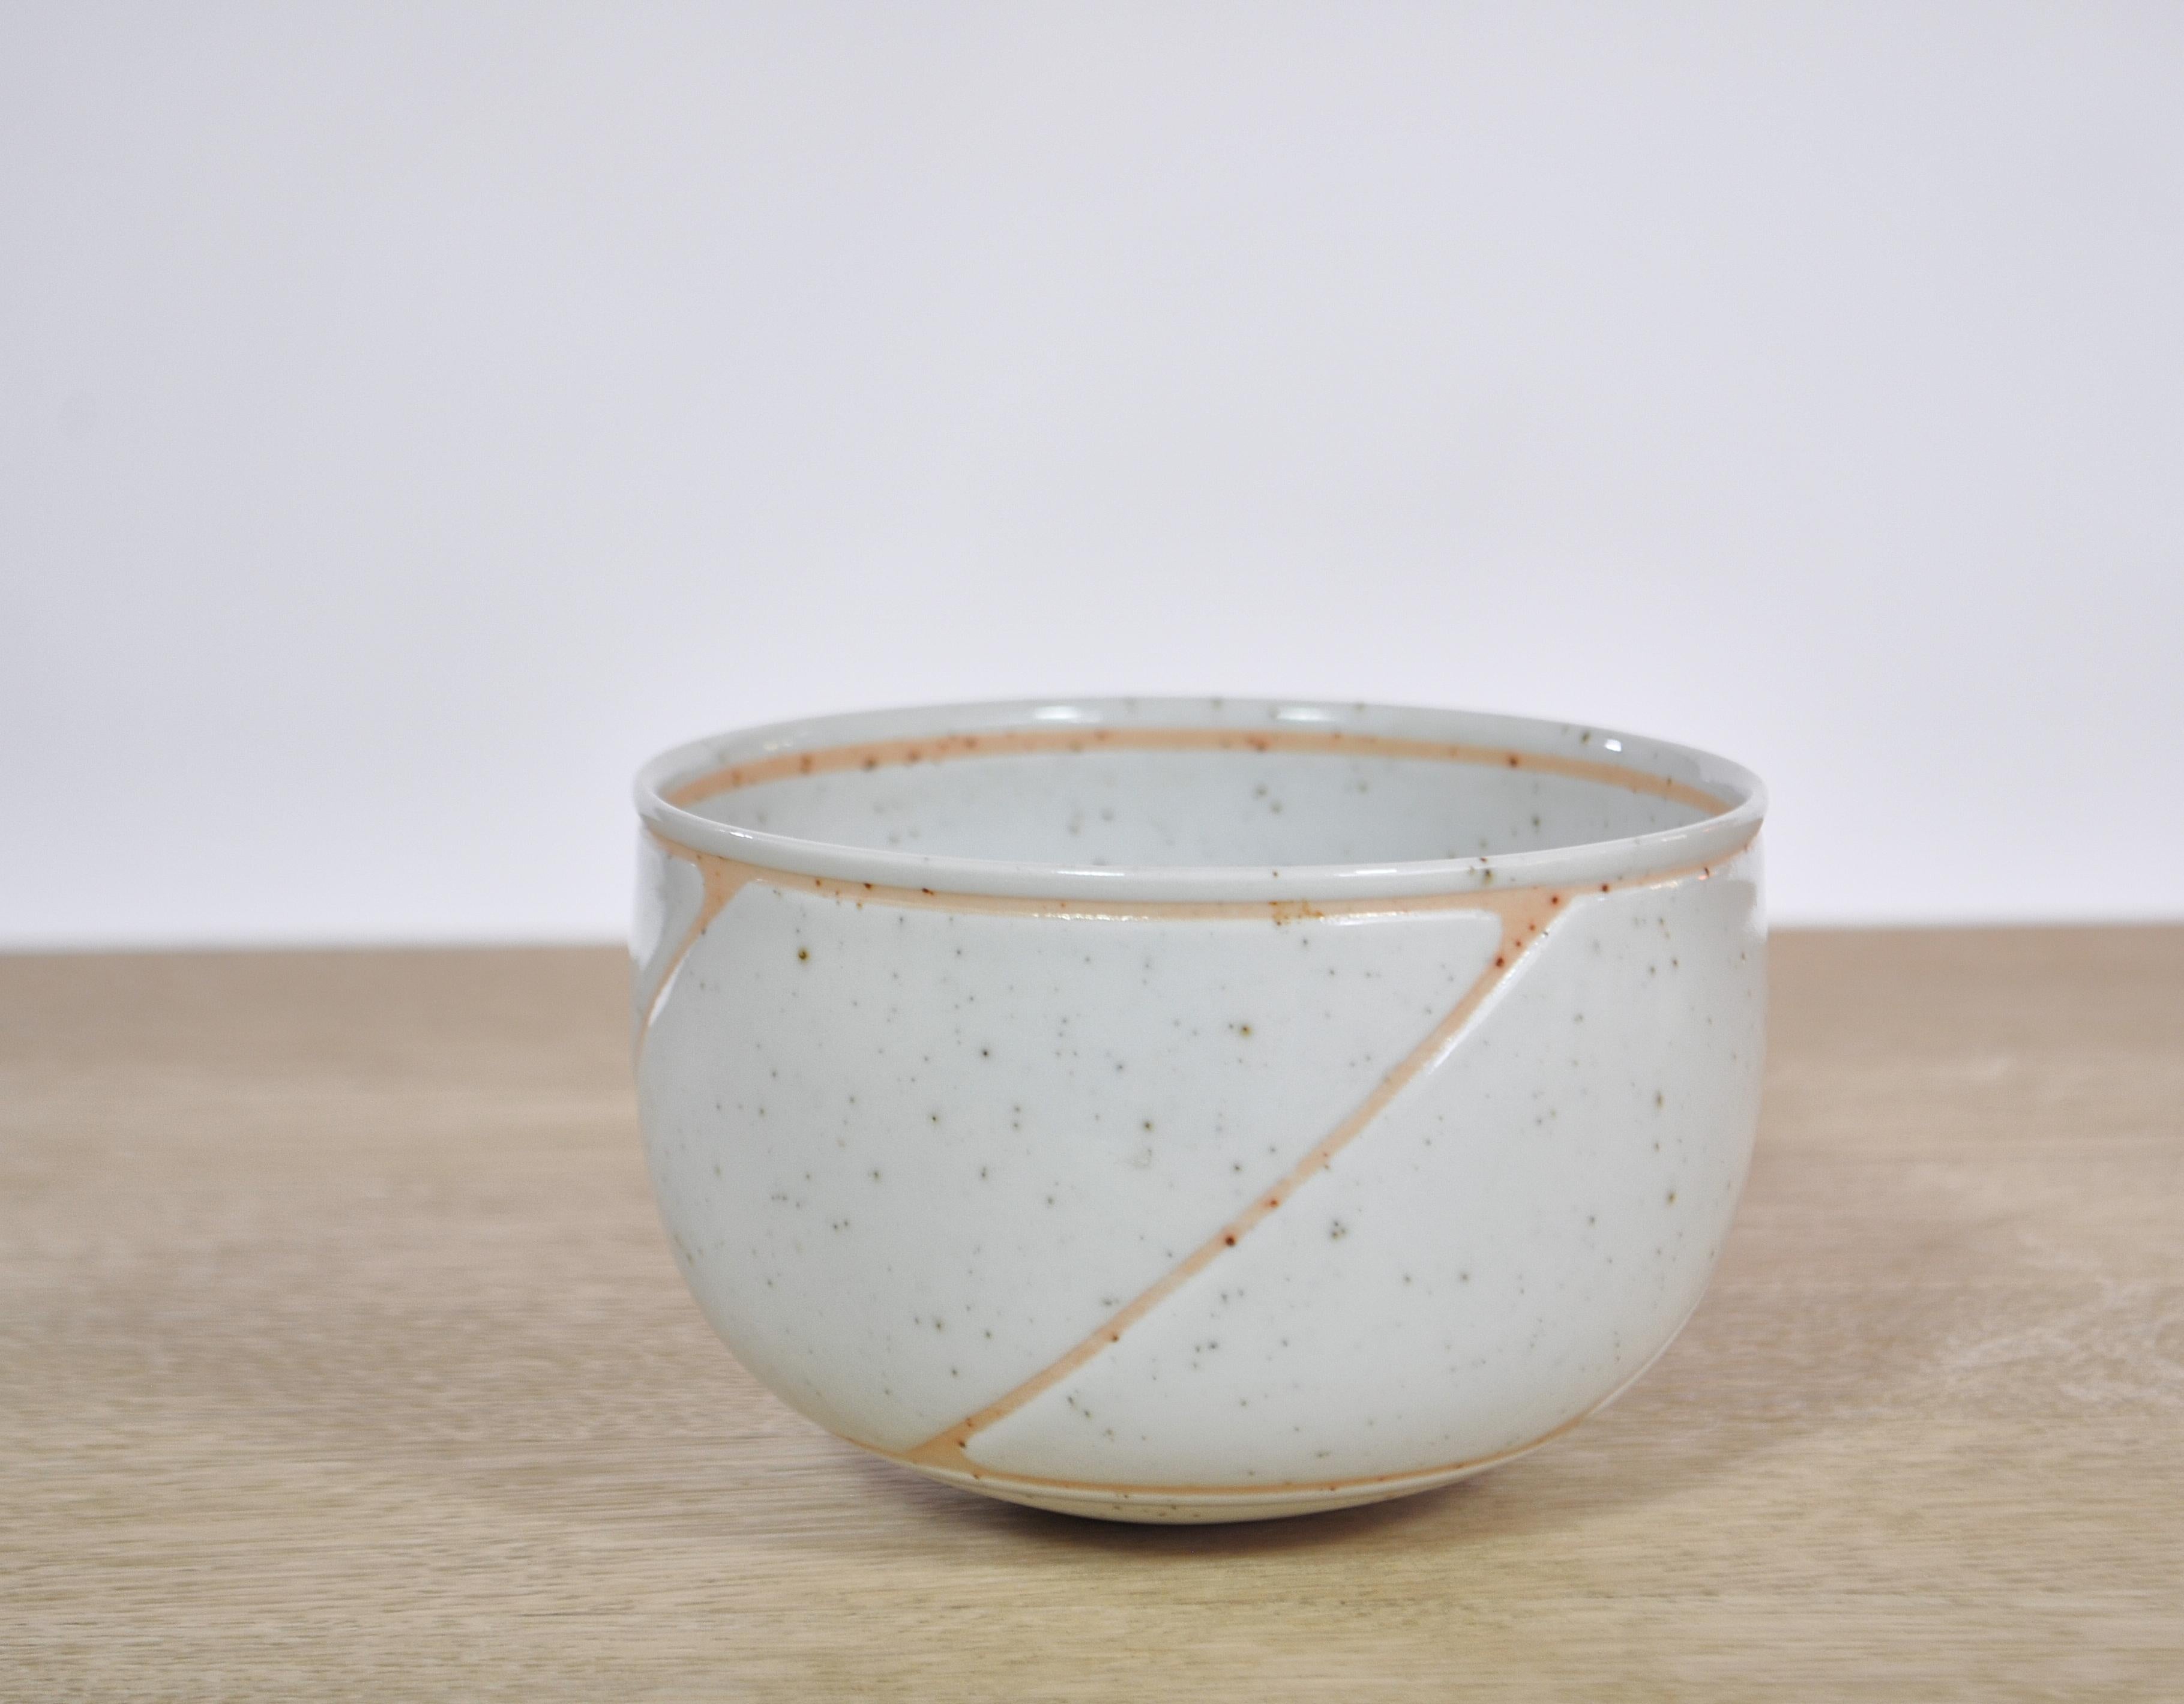 Beautiful stoneware bowl with rounded sides and straight rim and with resist decoration and speckled grey glaze by Danish/Turkish ceramist Alev Siesbye. This design is from 1977 and features her trademark shape and decoration. Signed and marked.